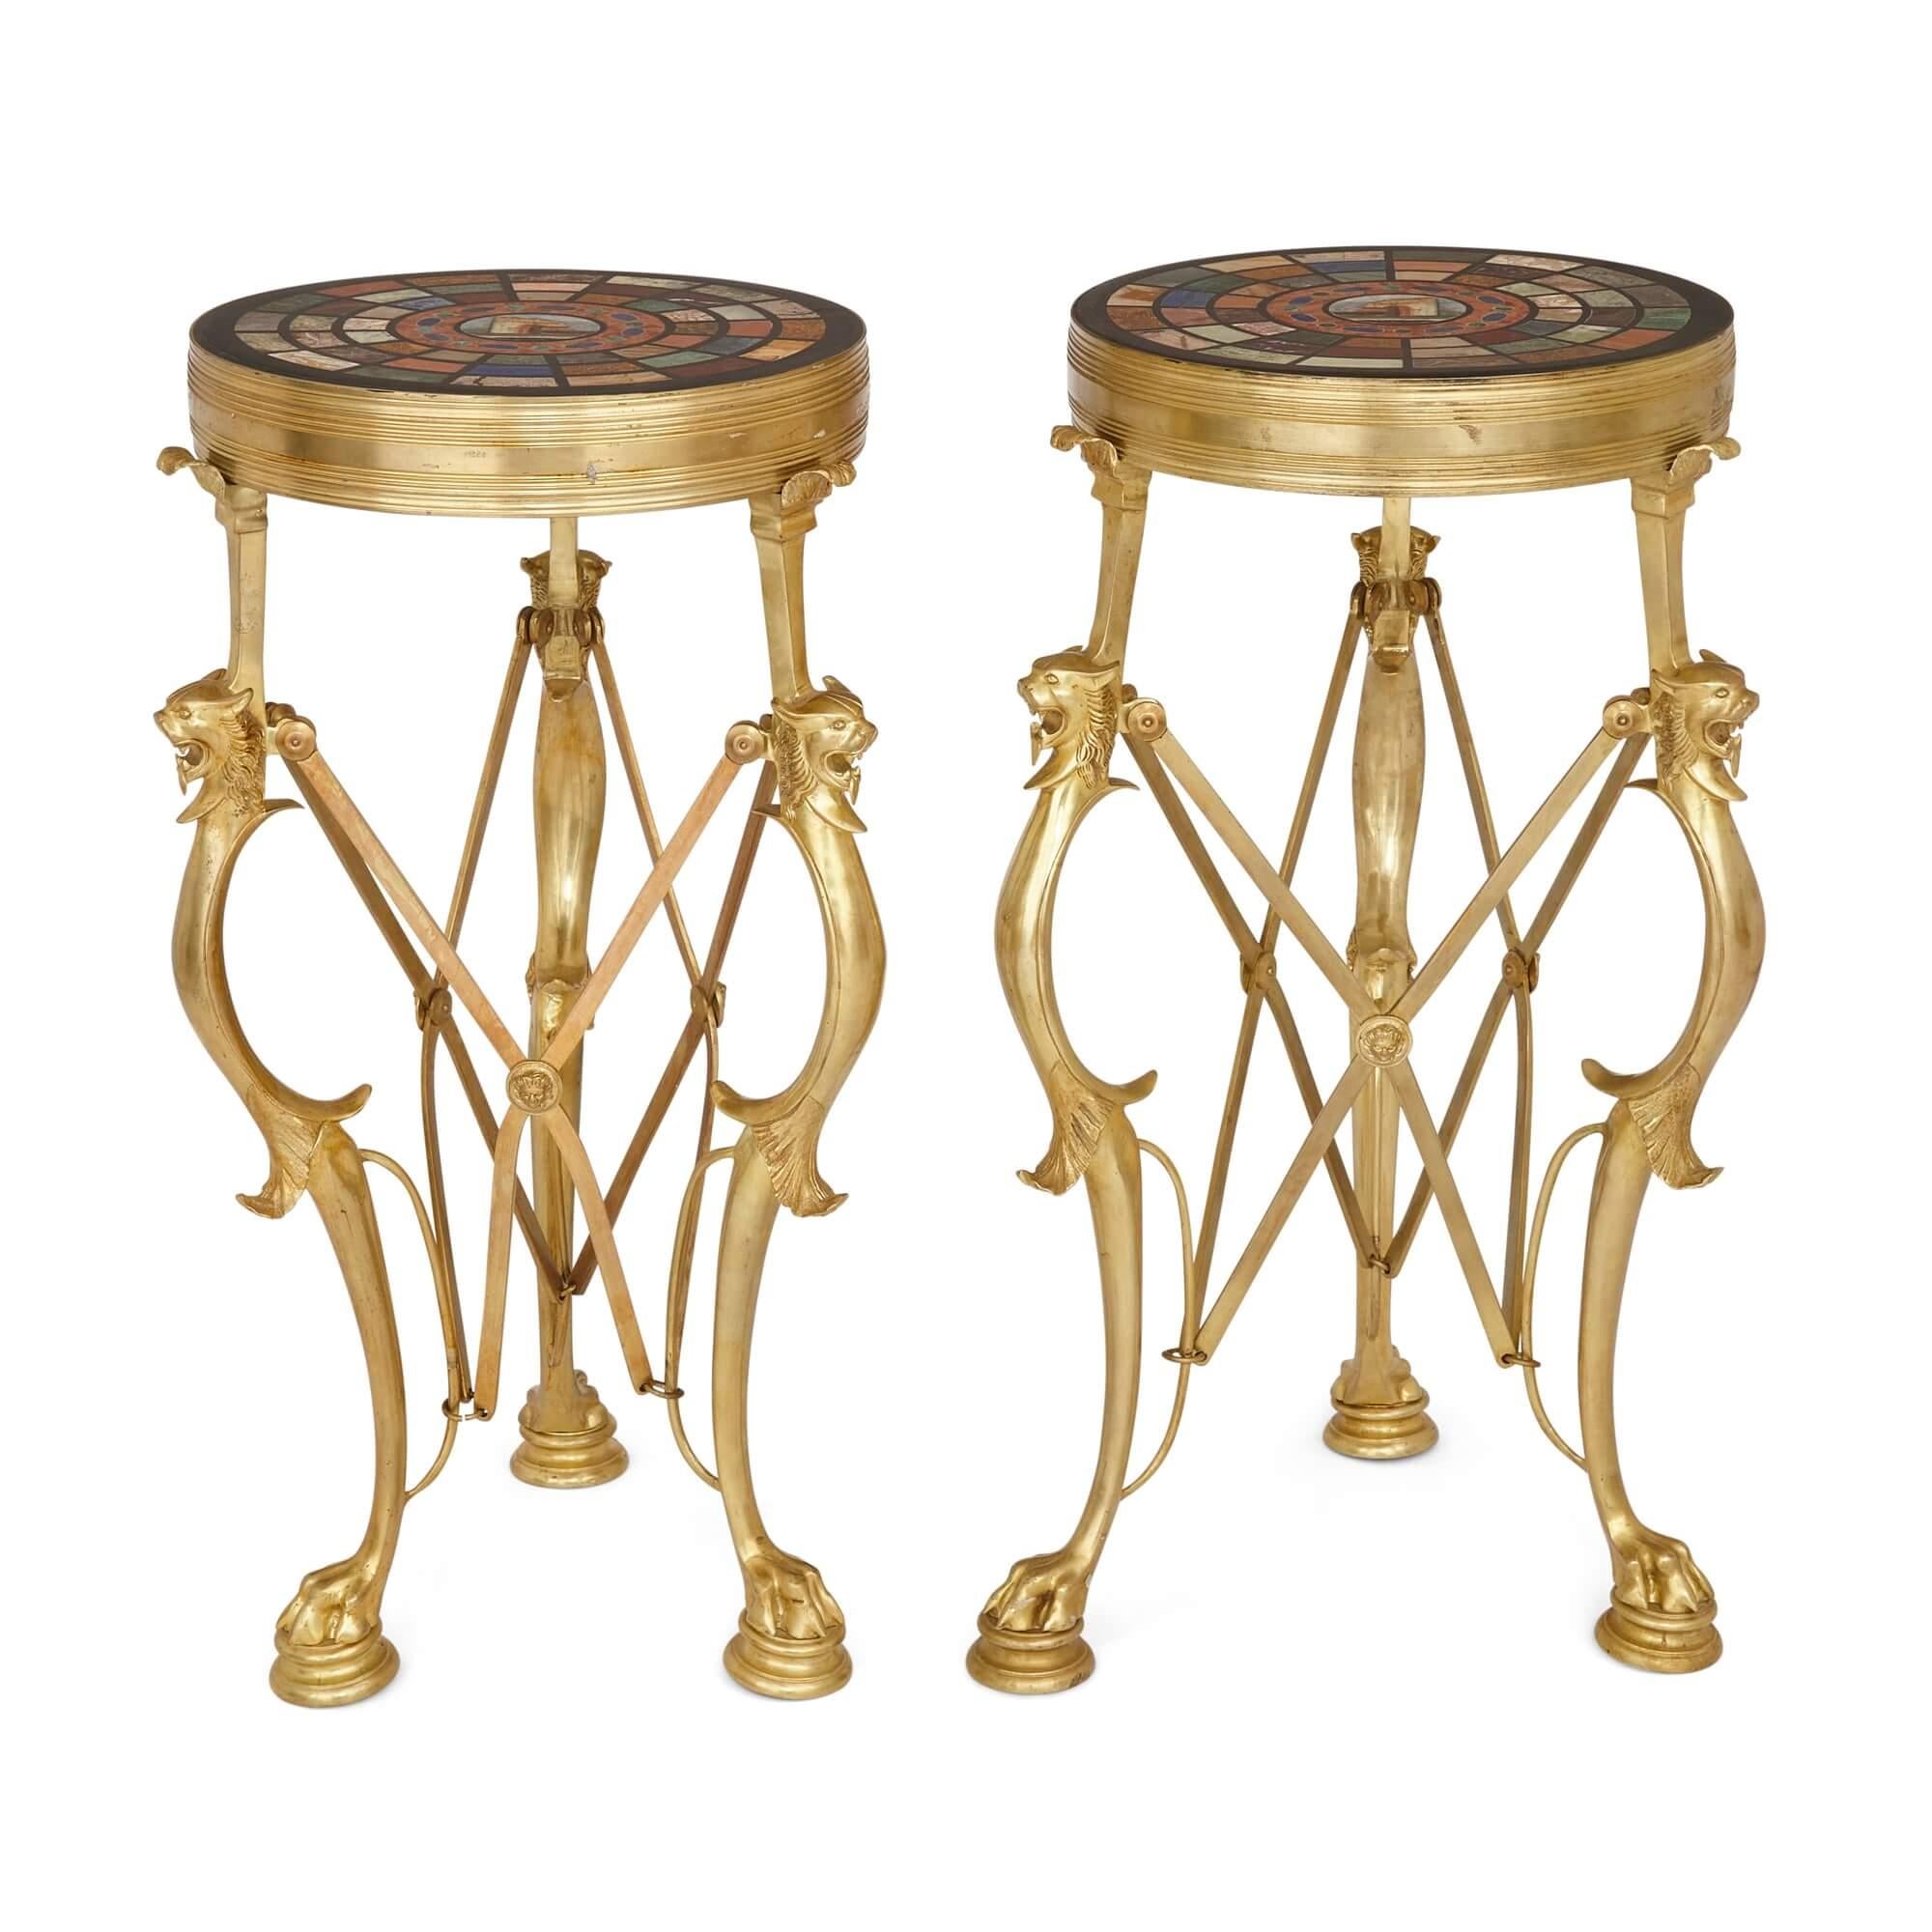 Pair of French specimen stone, micromosaic and gilt bronze gueridons 
French, 20th Century
Height 68cm, diameter 33cm

A gueridon is a furniture type in the form of an ornate table or stand on which various decorative pieces can be displayed. The